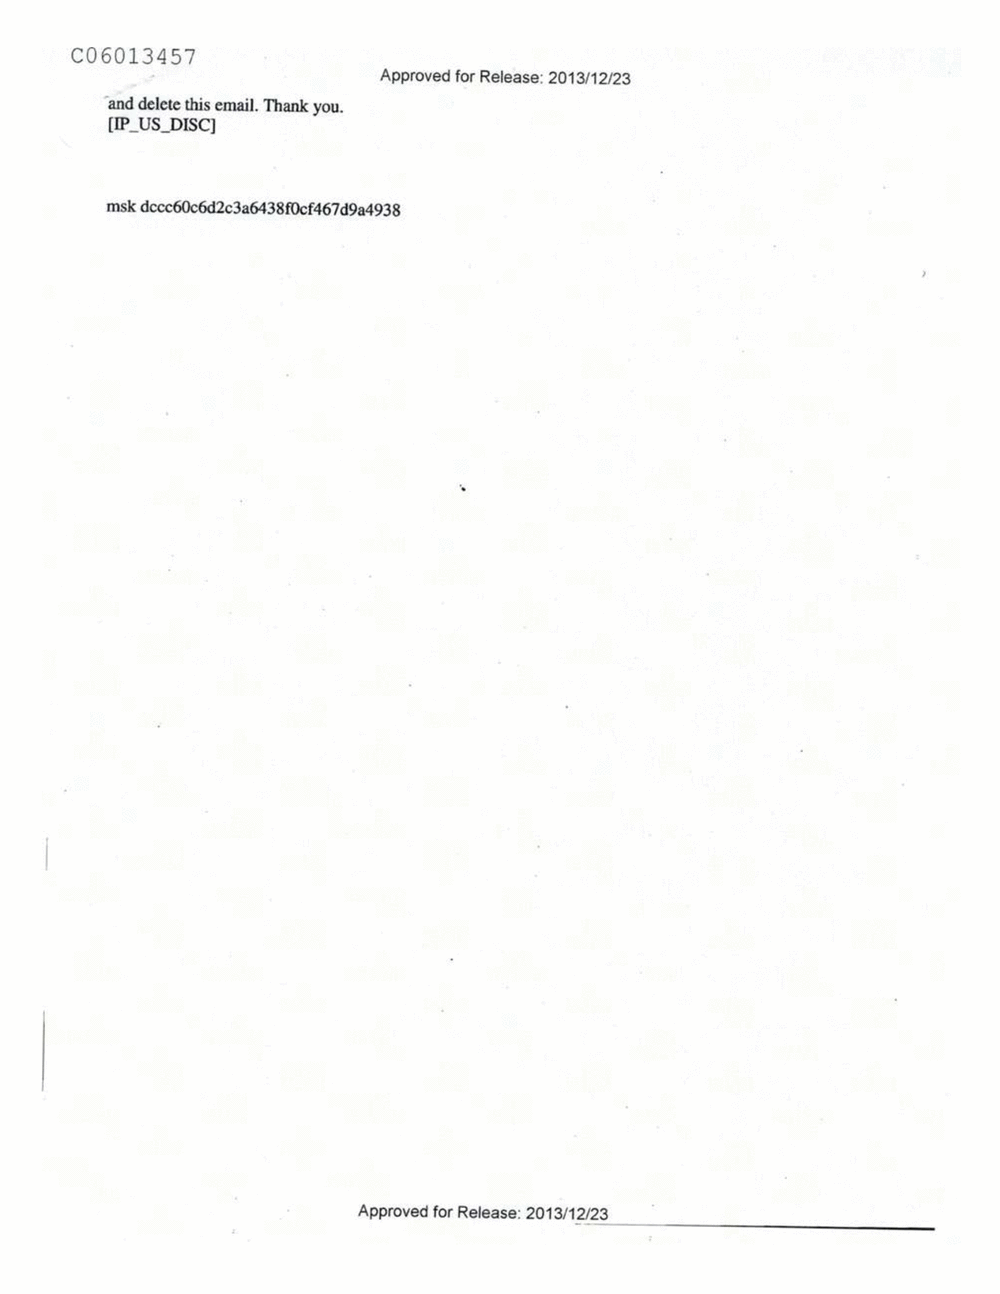 Page 326 from Email Correspondence Between Reporters and CIA Flacks